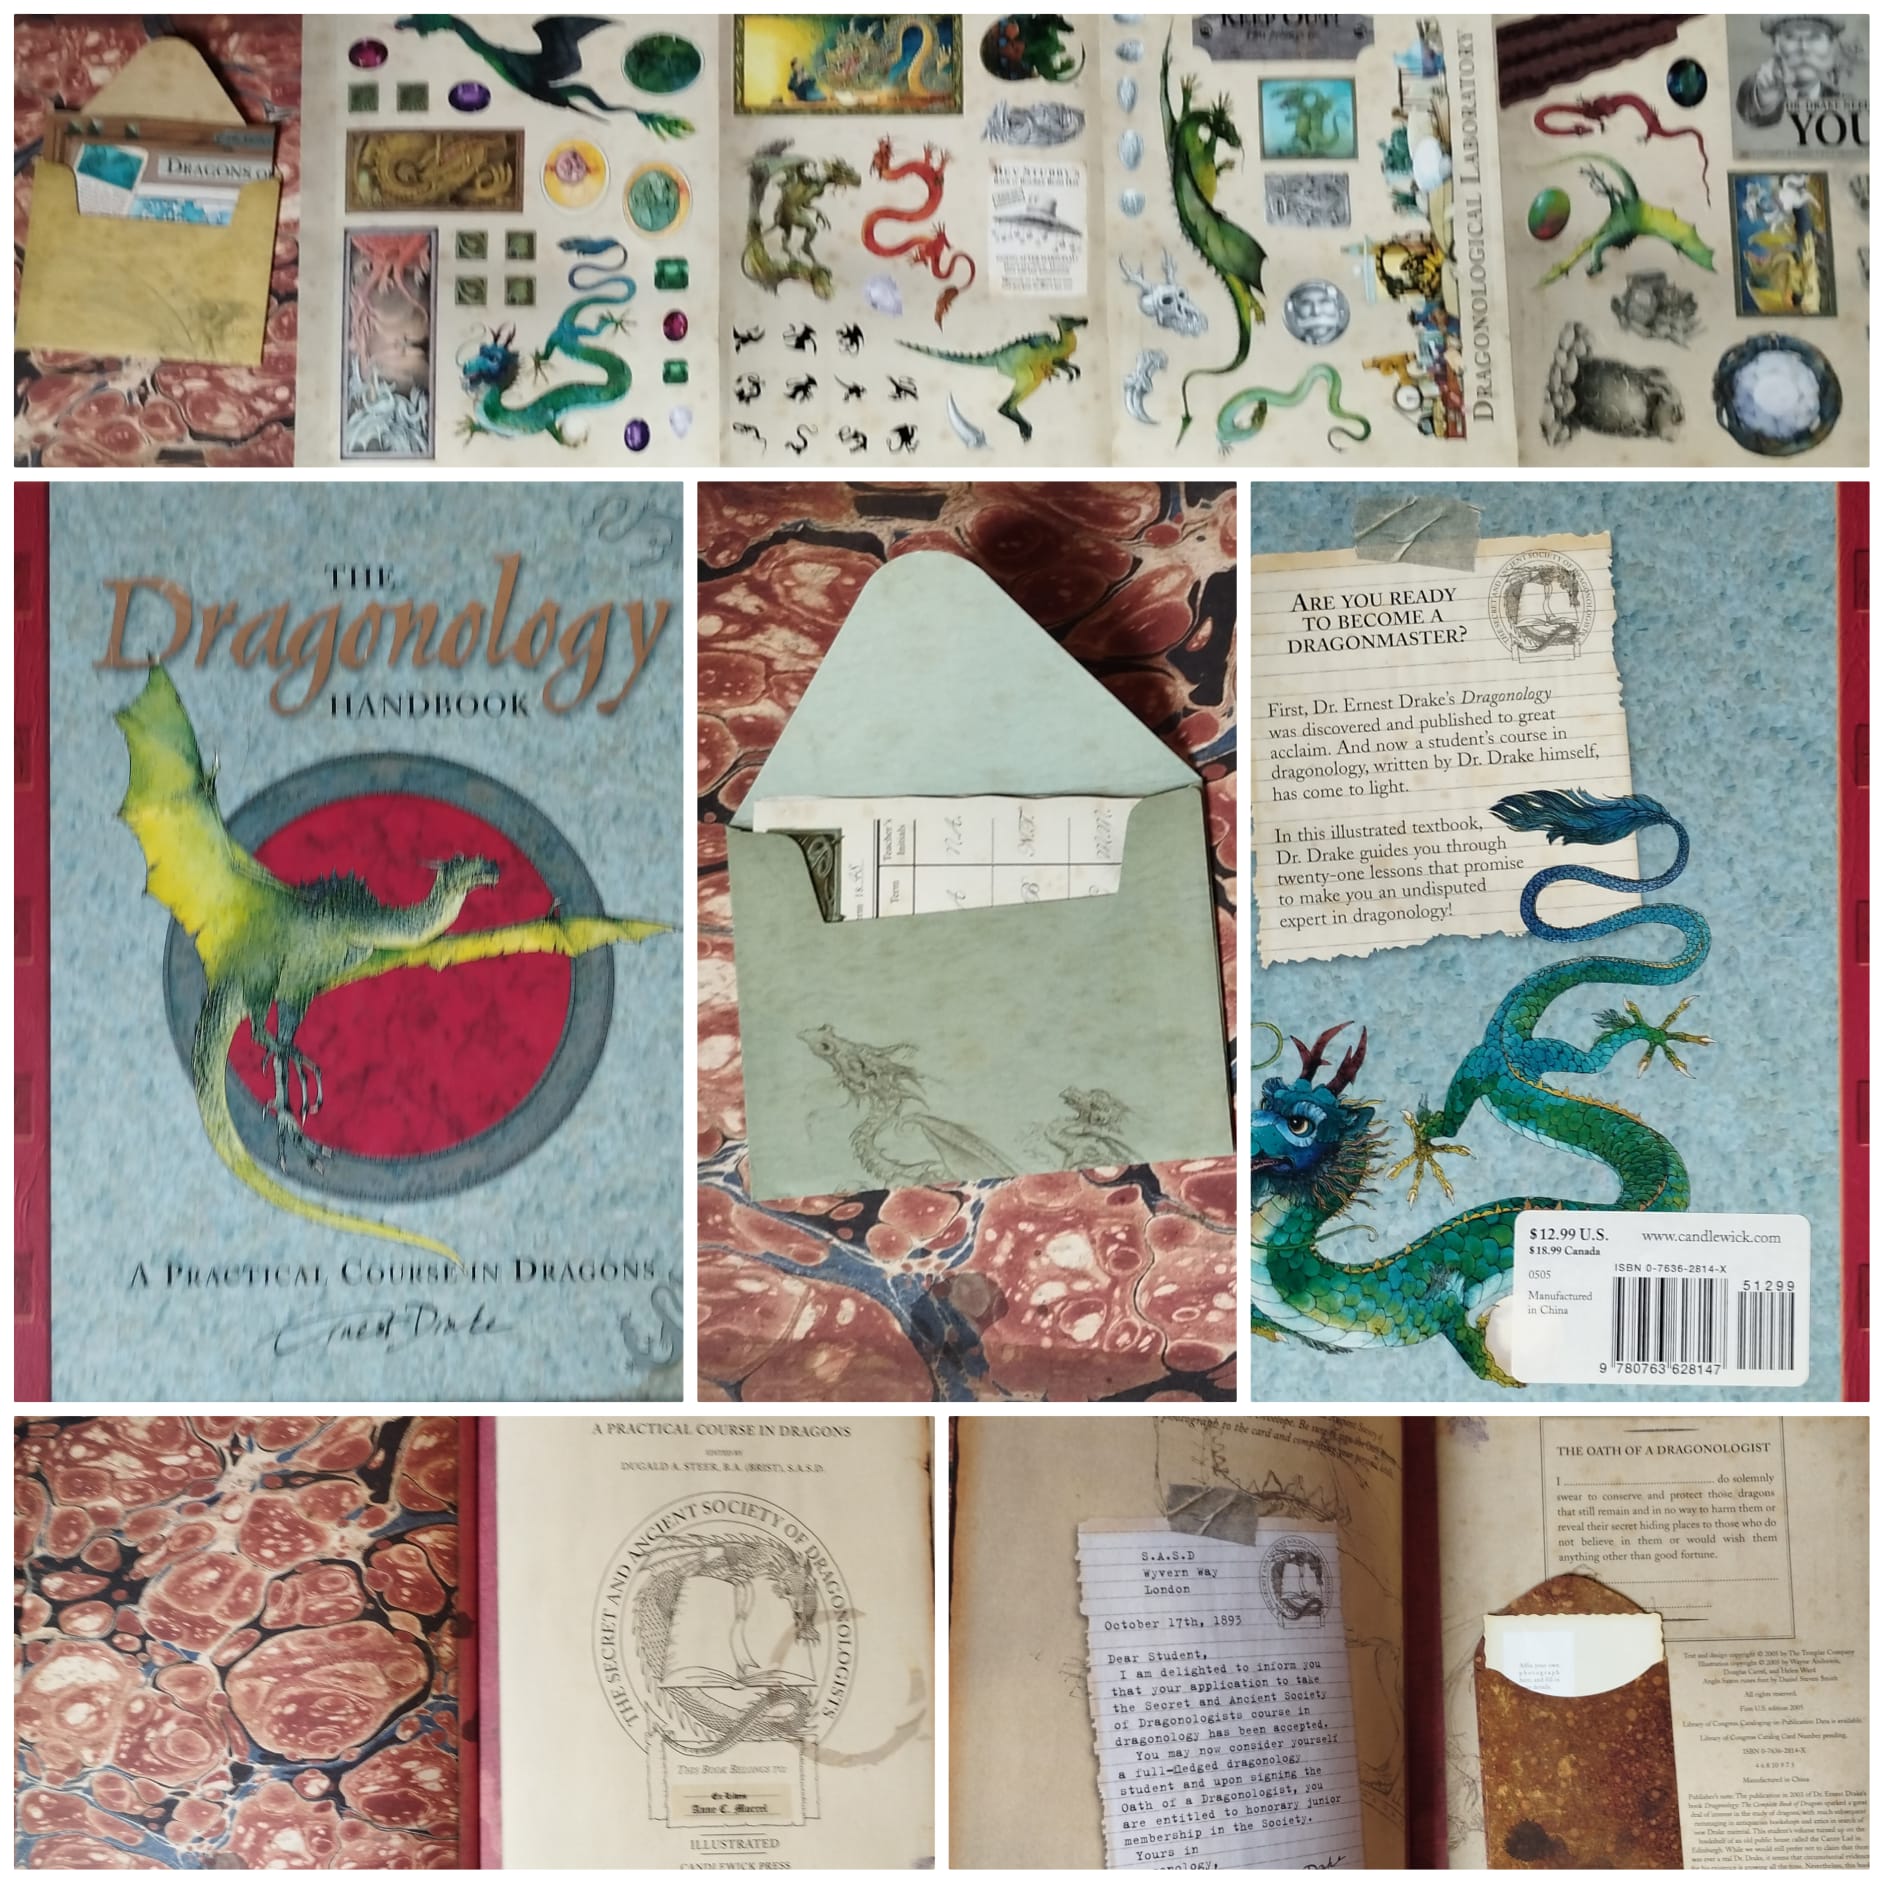 The Dragonology Handbook A Practical Course in Dragons Candlewick Press